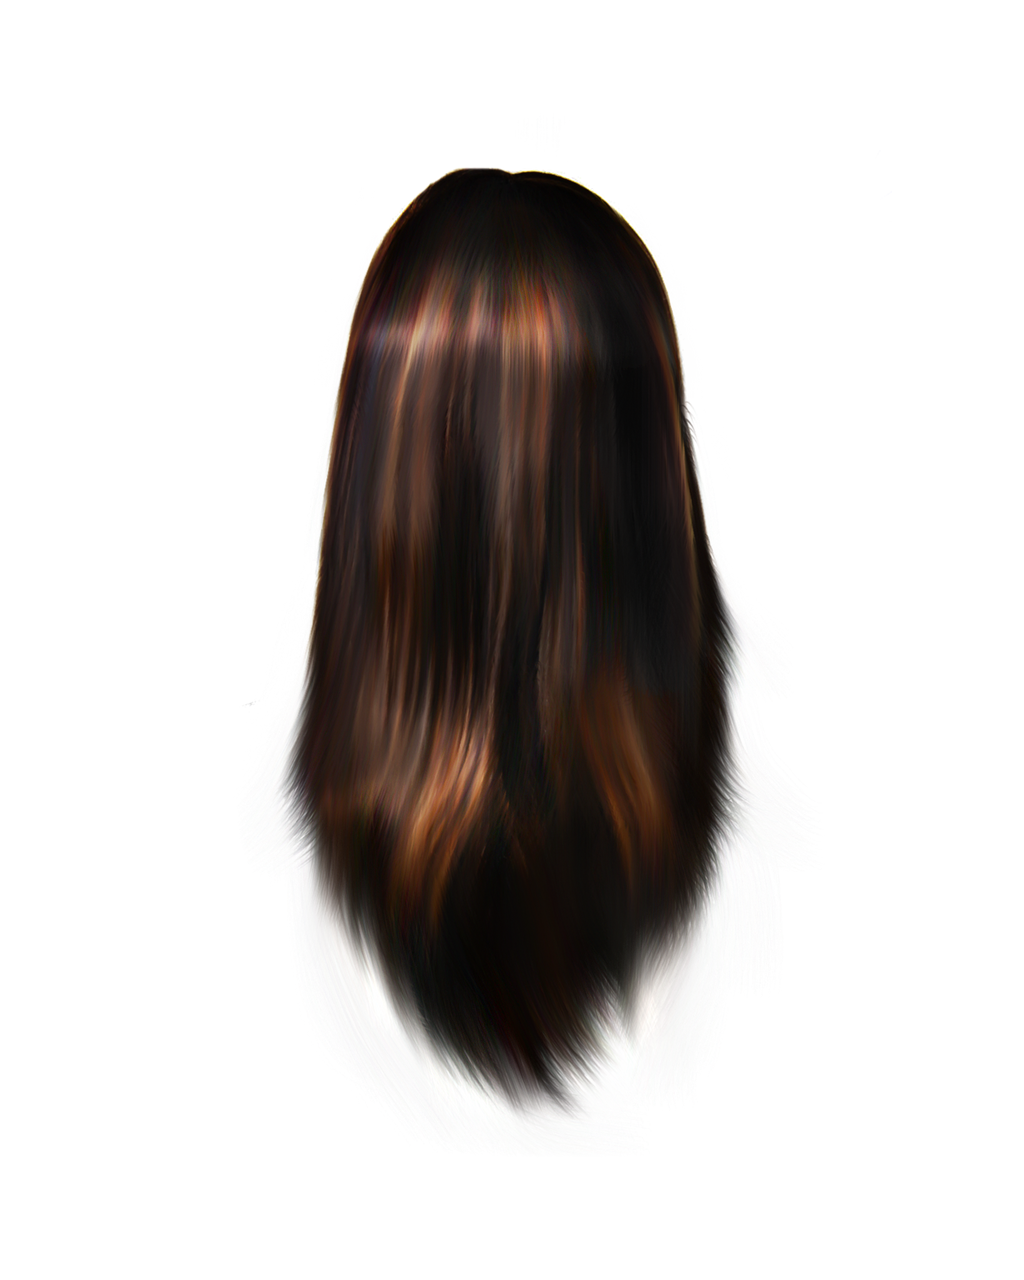 Png Hair 5g by Moonglowlilly on DeviantArt